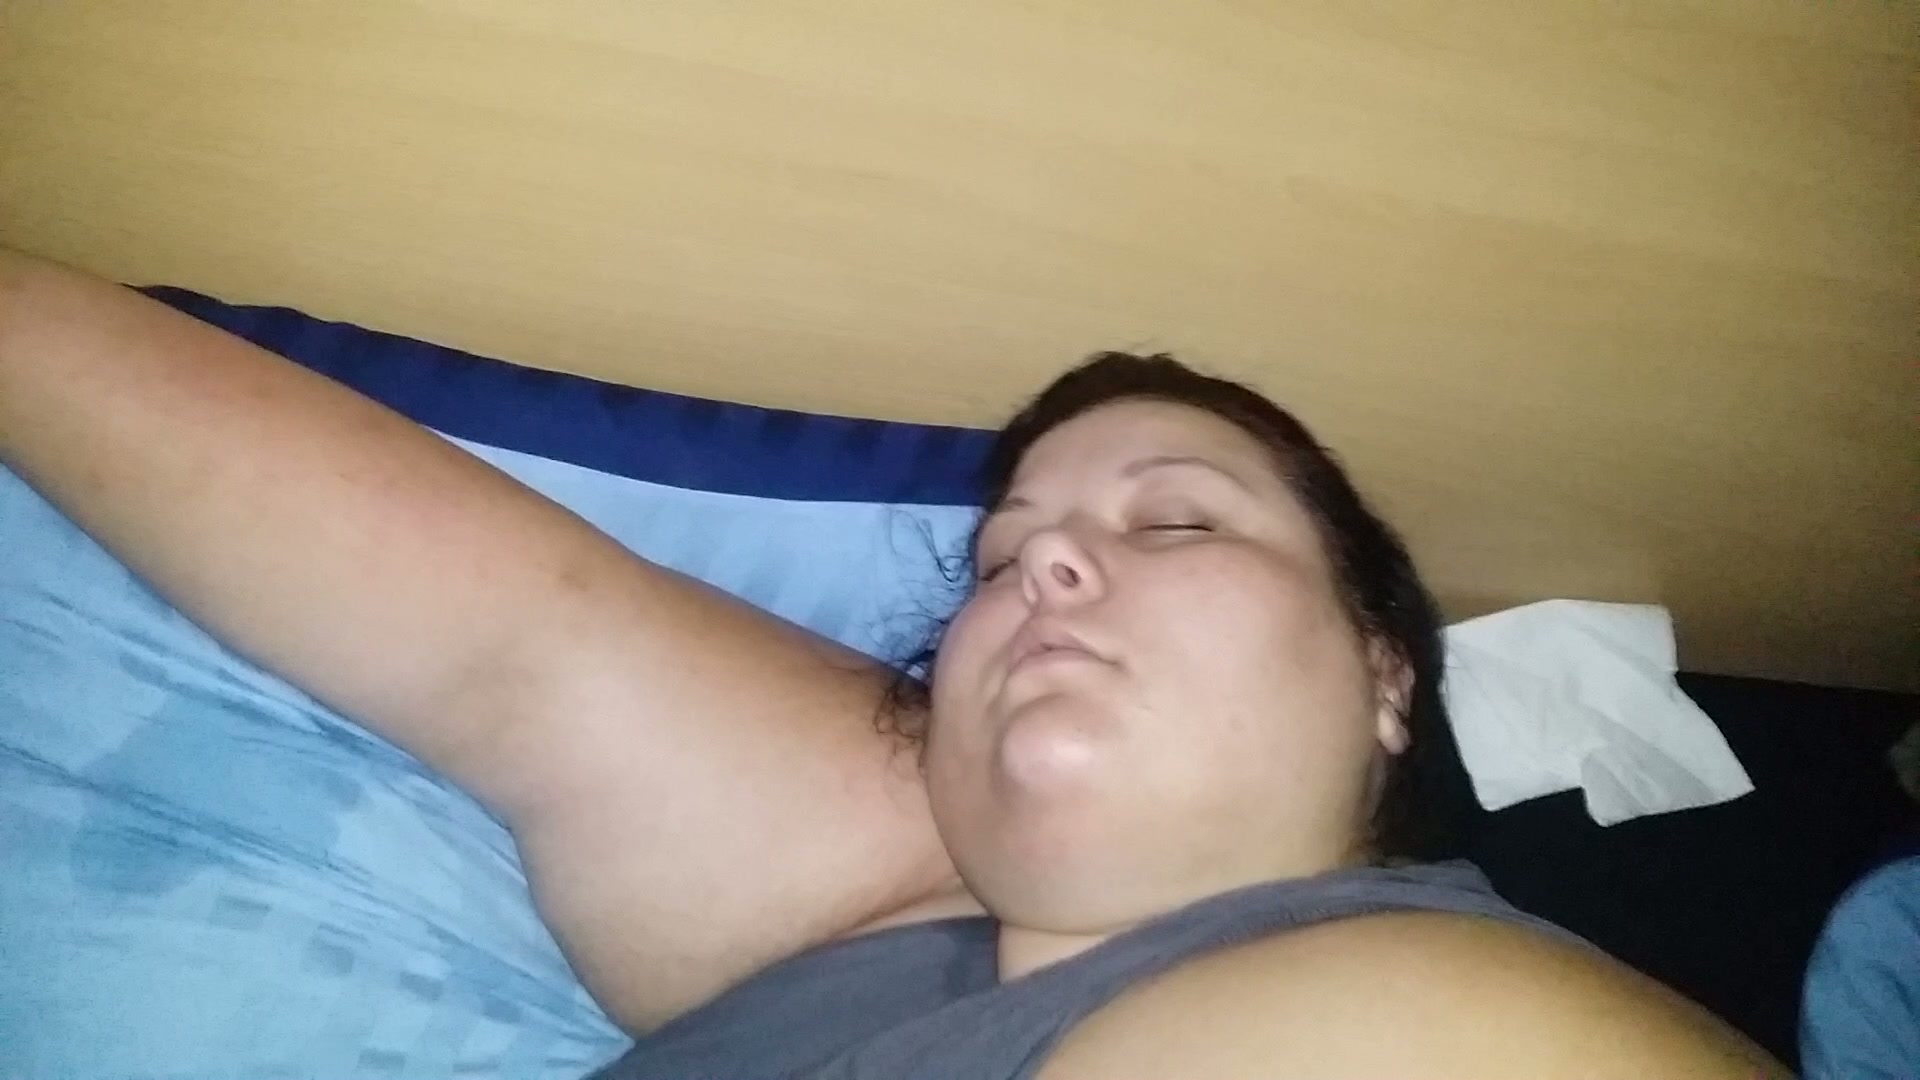 I love to cum all over my chubby wifes ass while shes sleeping Adult Picture